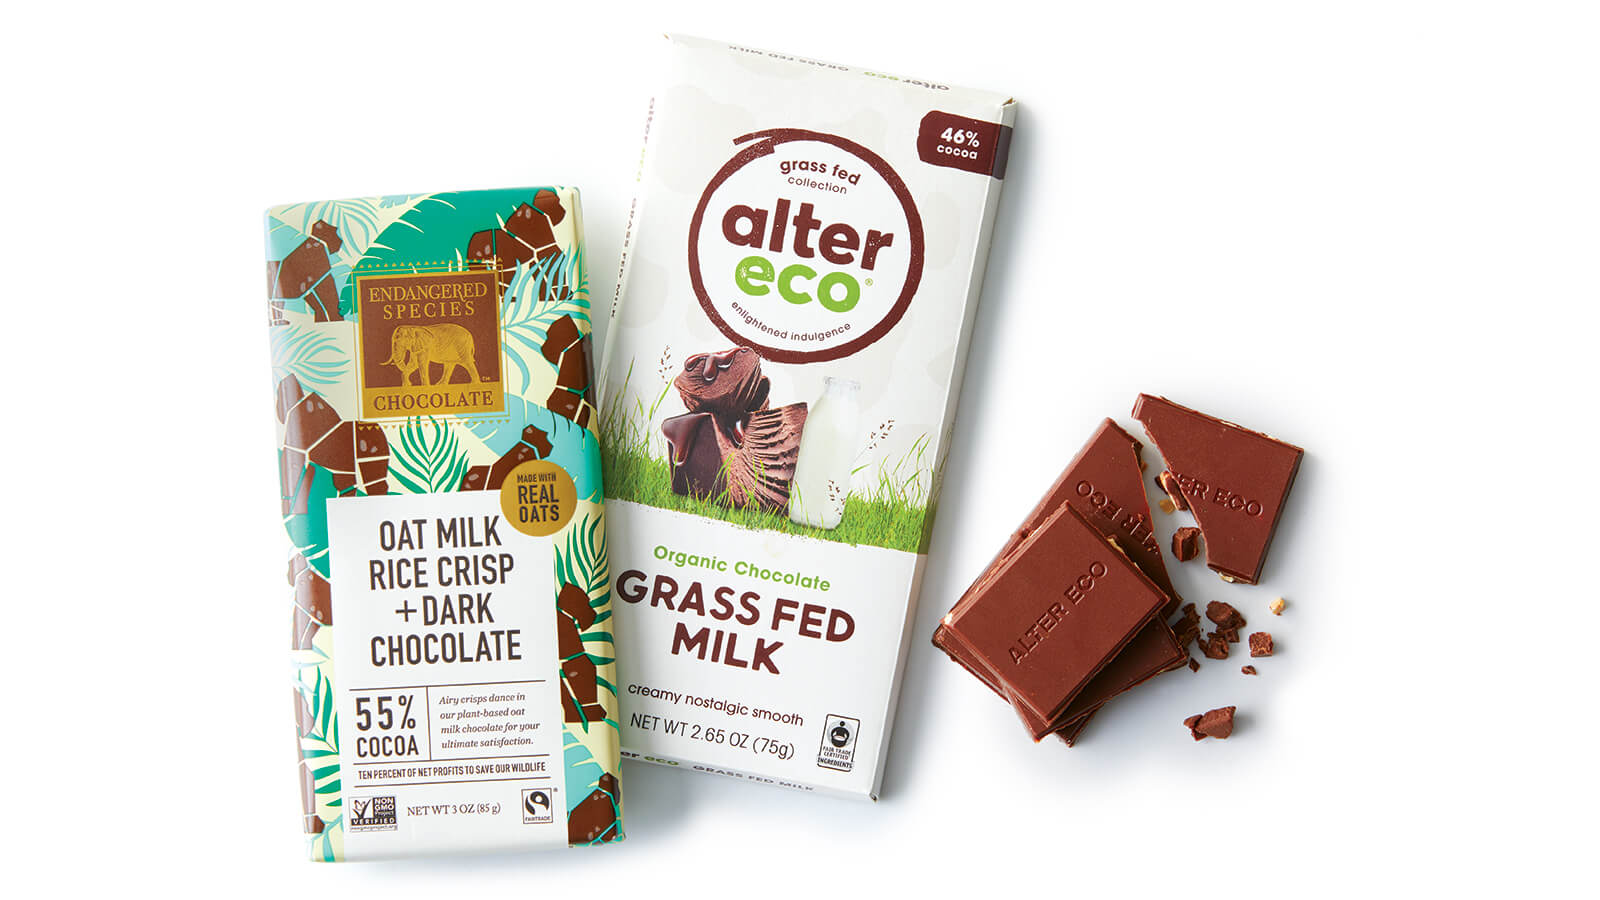 Endangered Species Oat Milk Chocolate Bars and Alter Eco Grass Fed Milk Bars